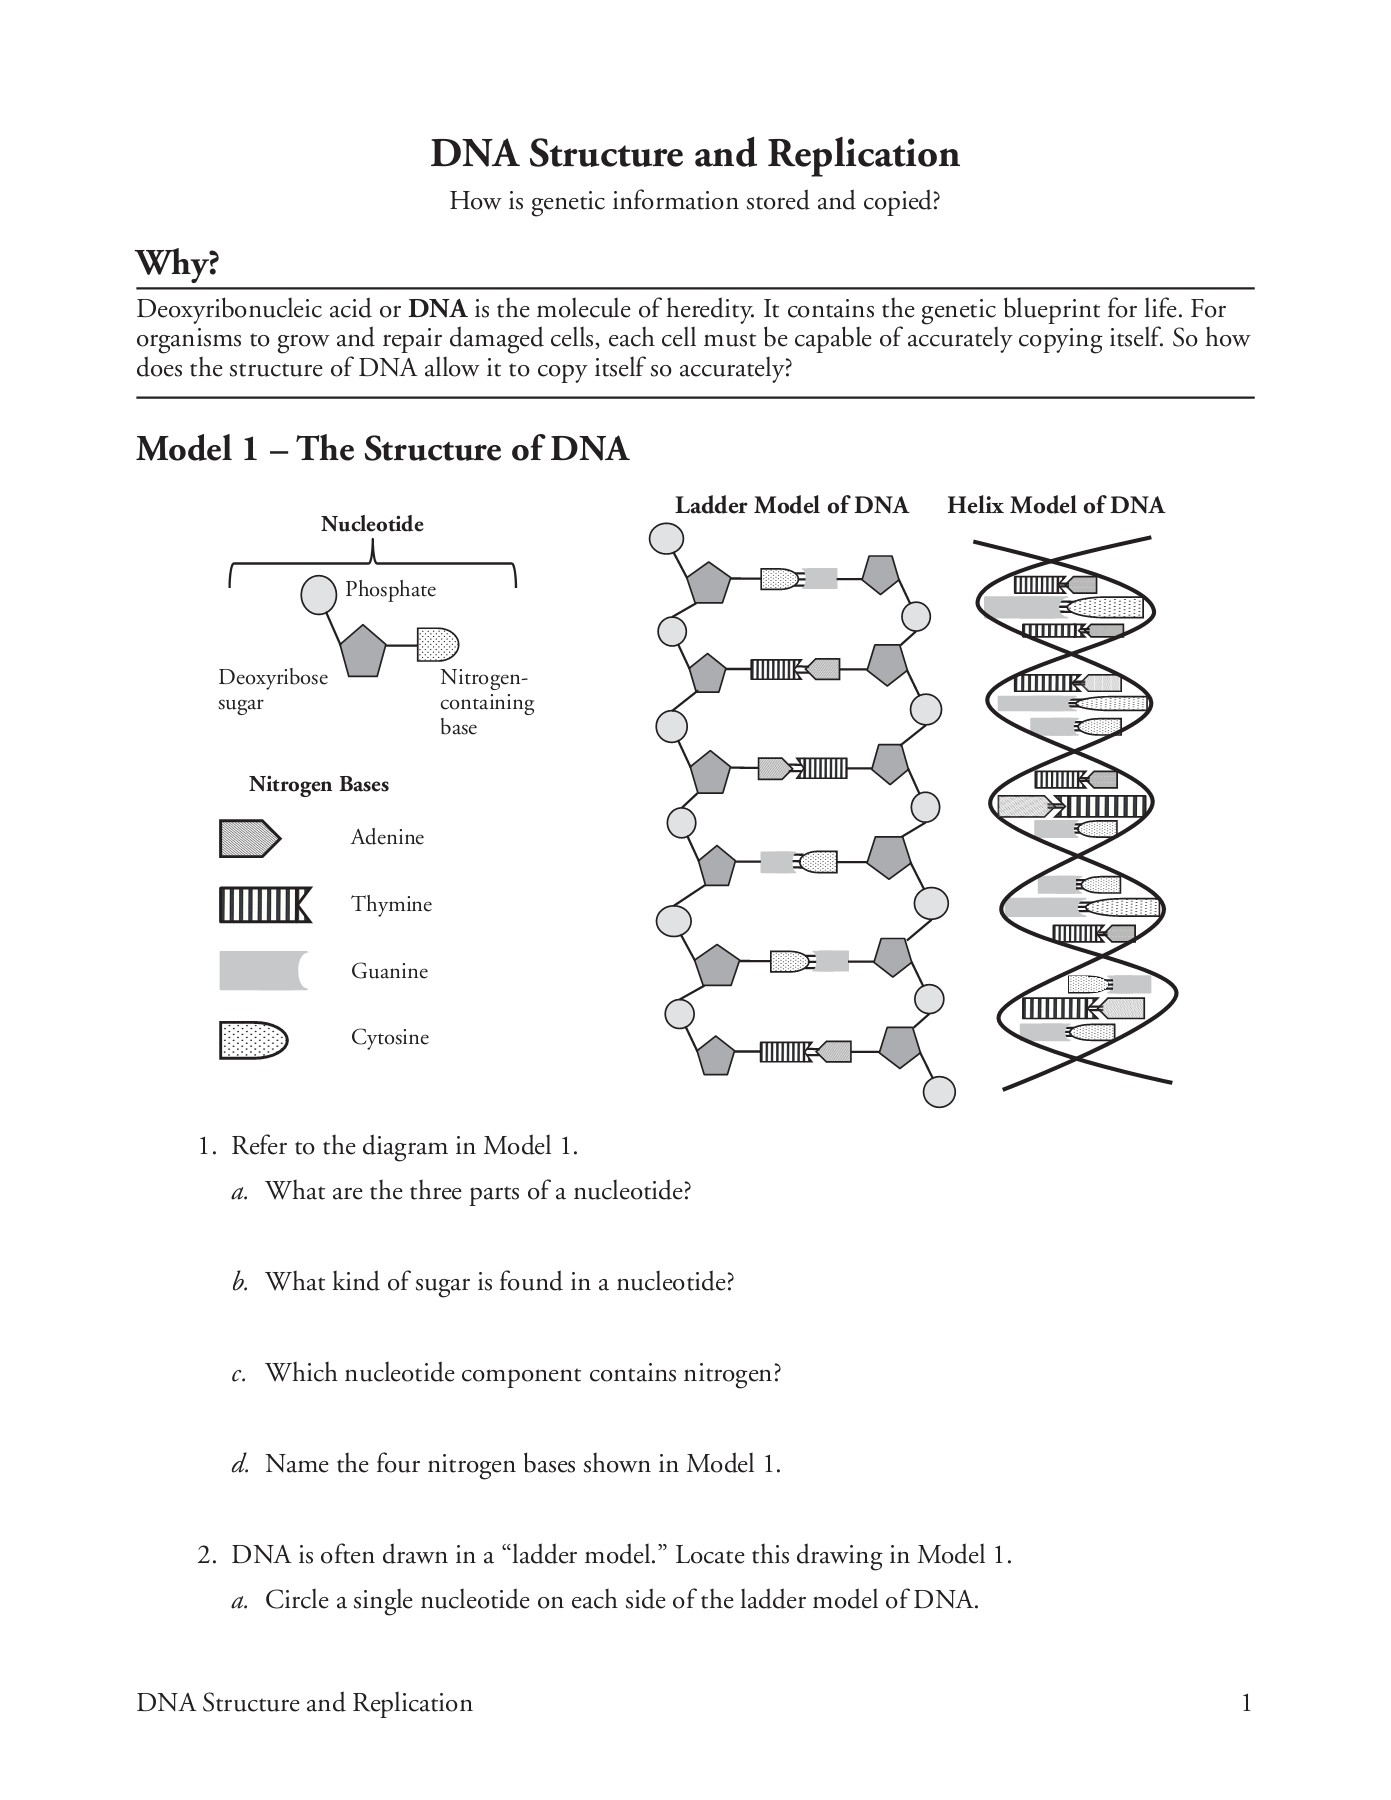 Dna Molecule Diagram Dna Structure And Replication Pages 1 5 Text Version Anyflip